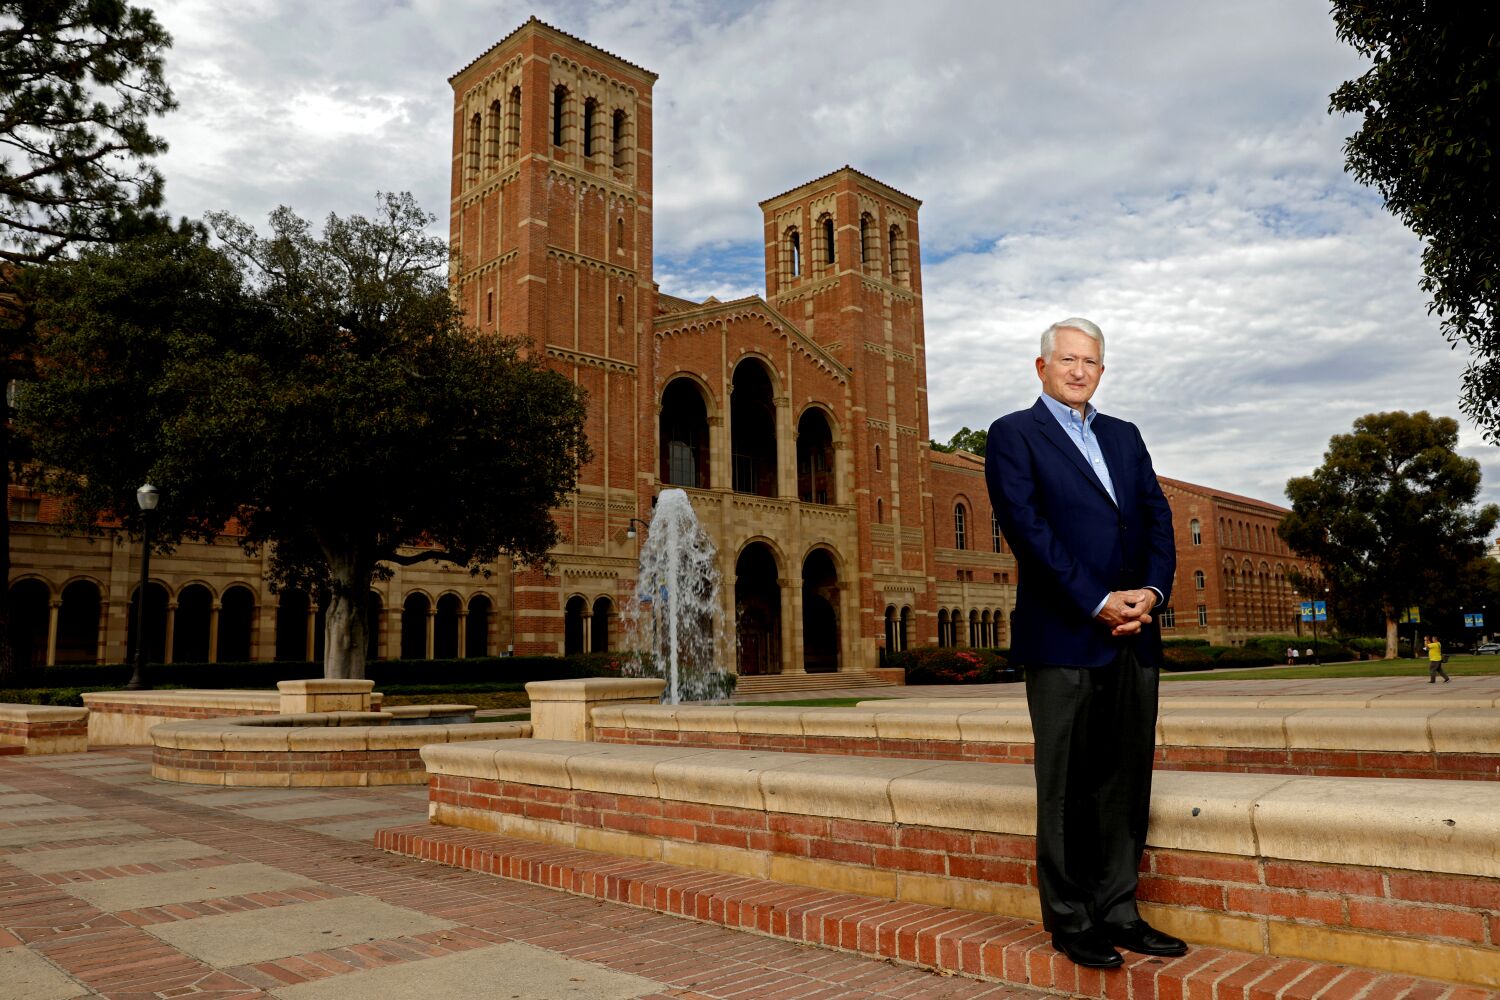 UCLA Chancellor Gene Block to step down after boosting enrollment, diversity, rankings